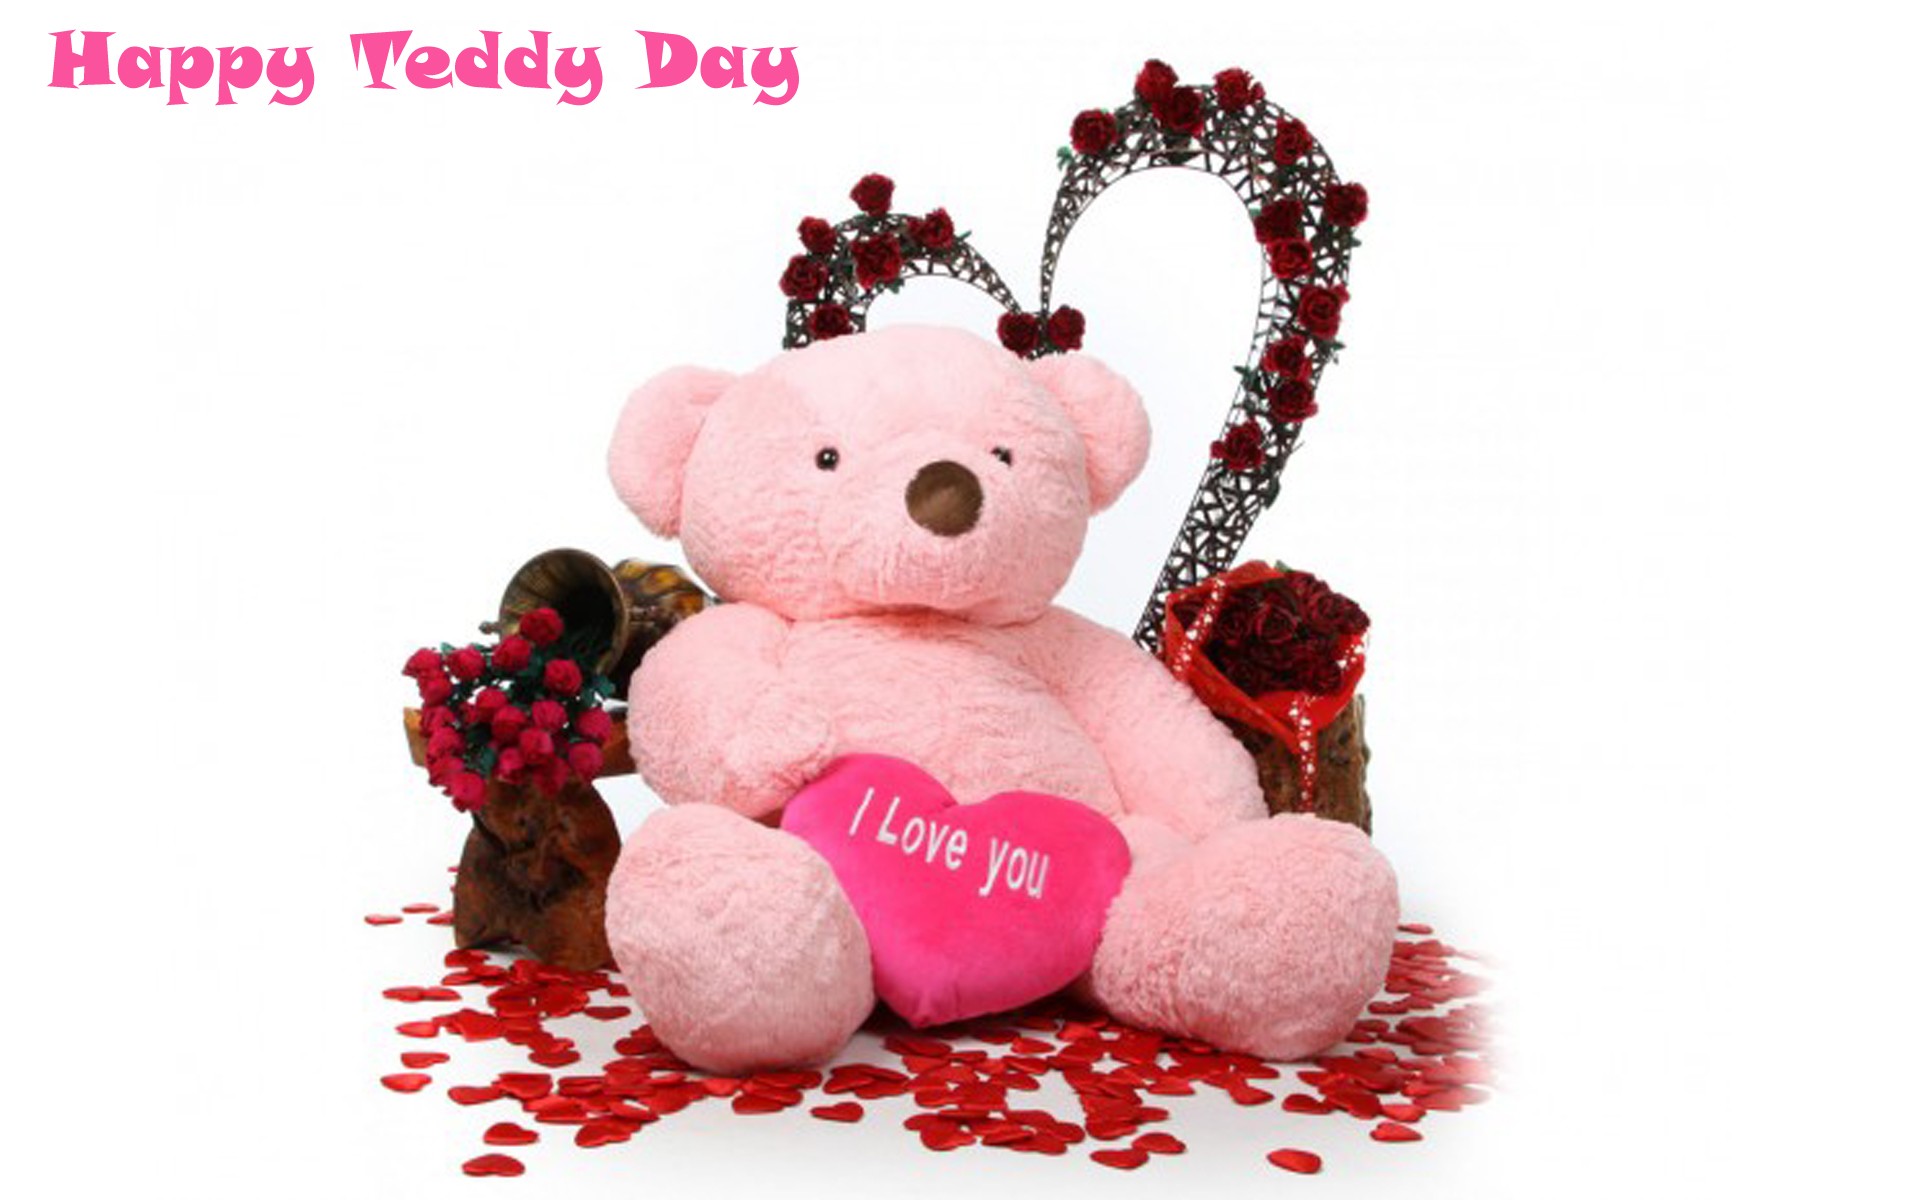 Teddy Day Images with Love